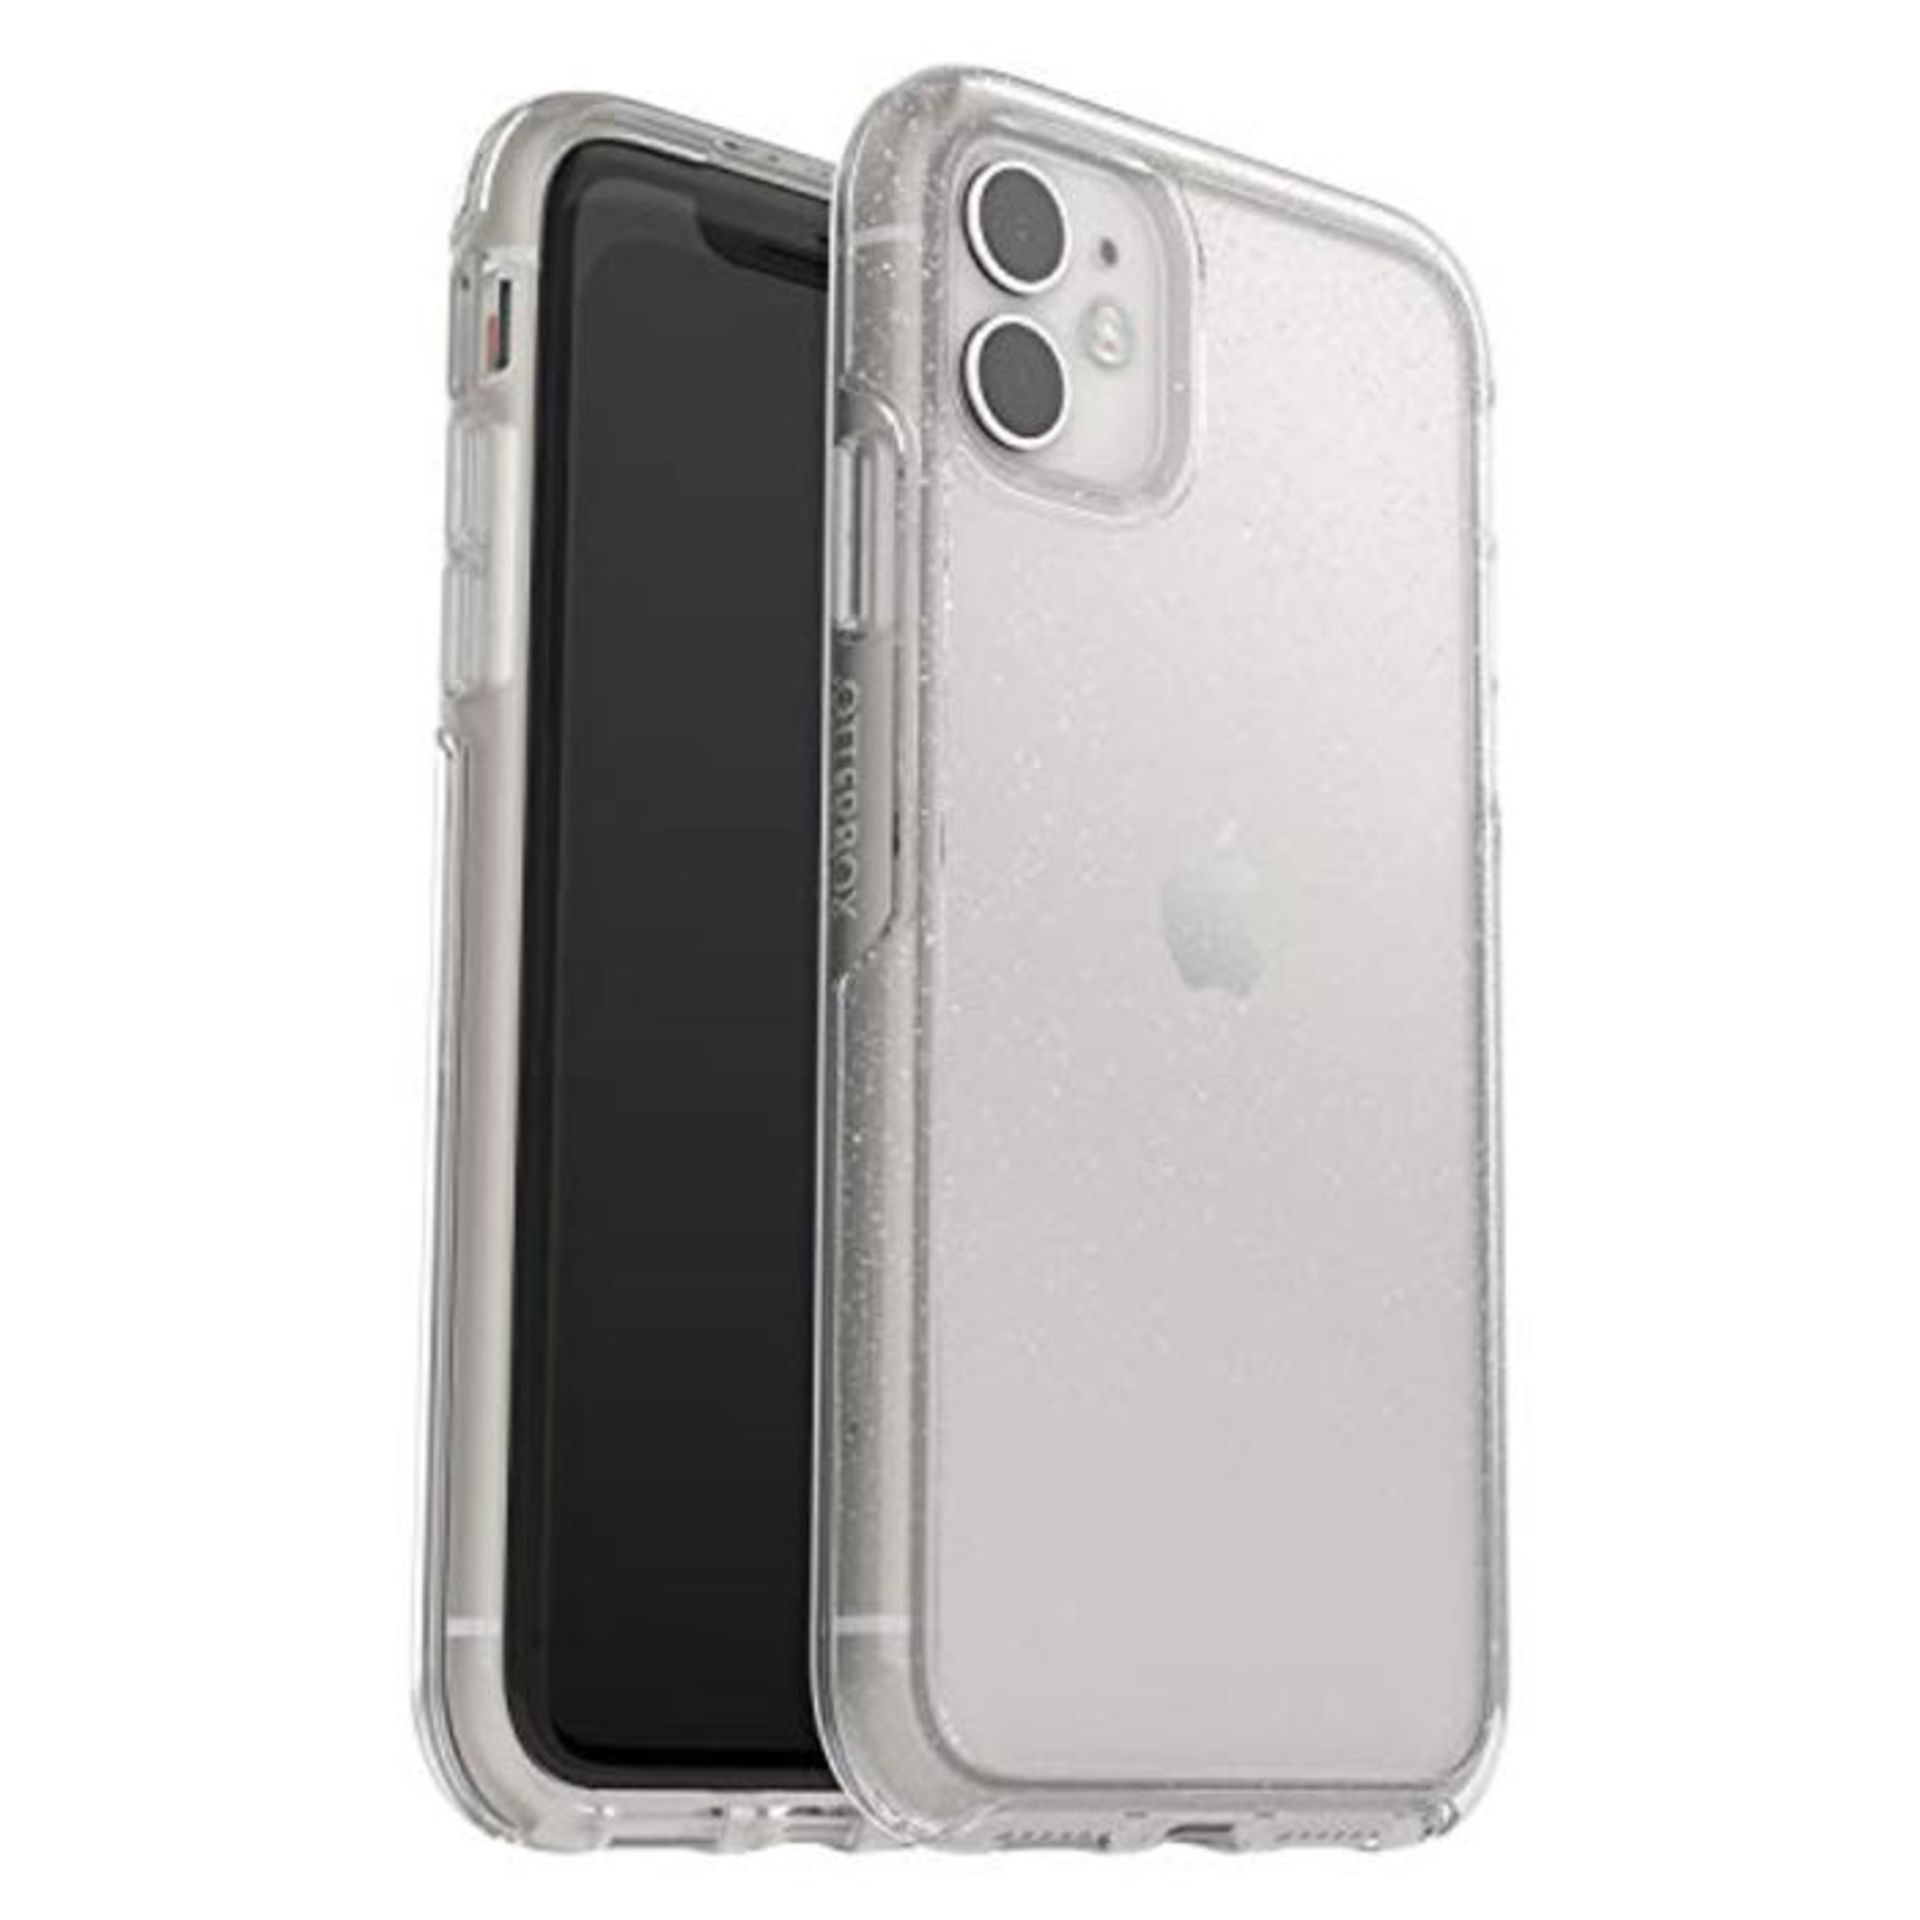 OtterBox for Apple iPhone 11, Sleek Drop Proof Protective Clear Case, Symmetry Clear S